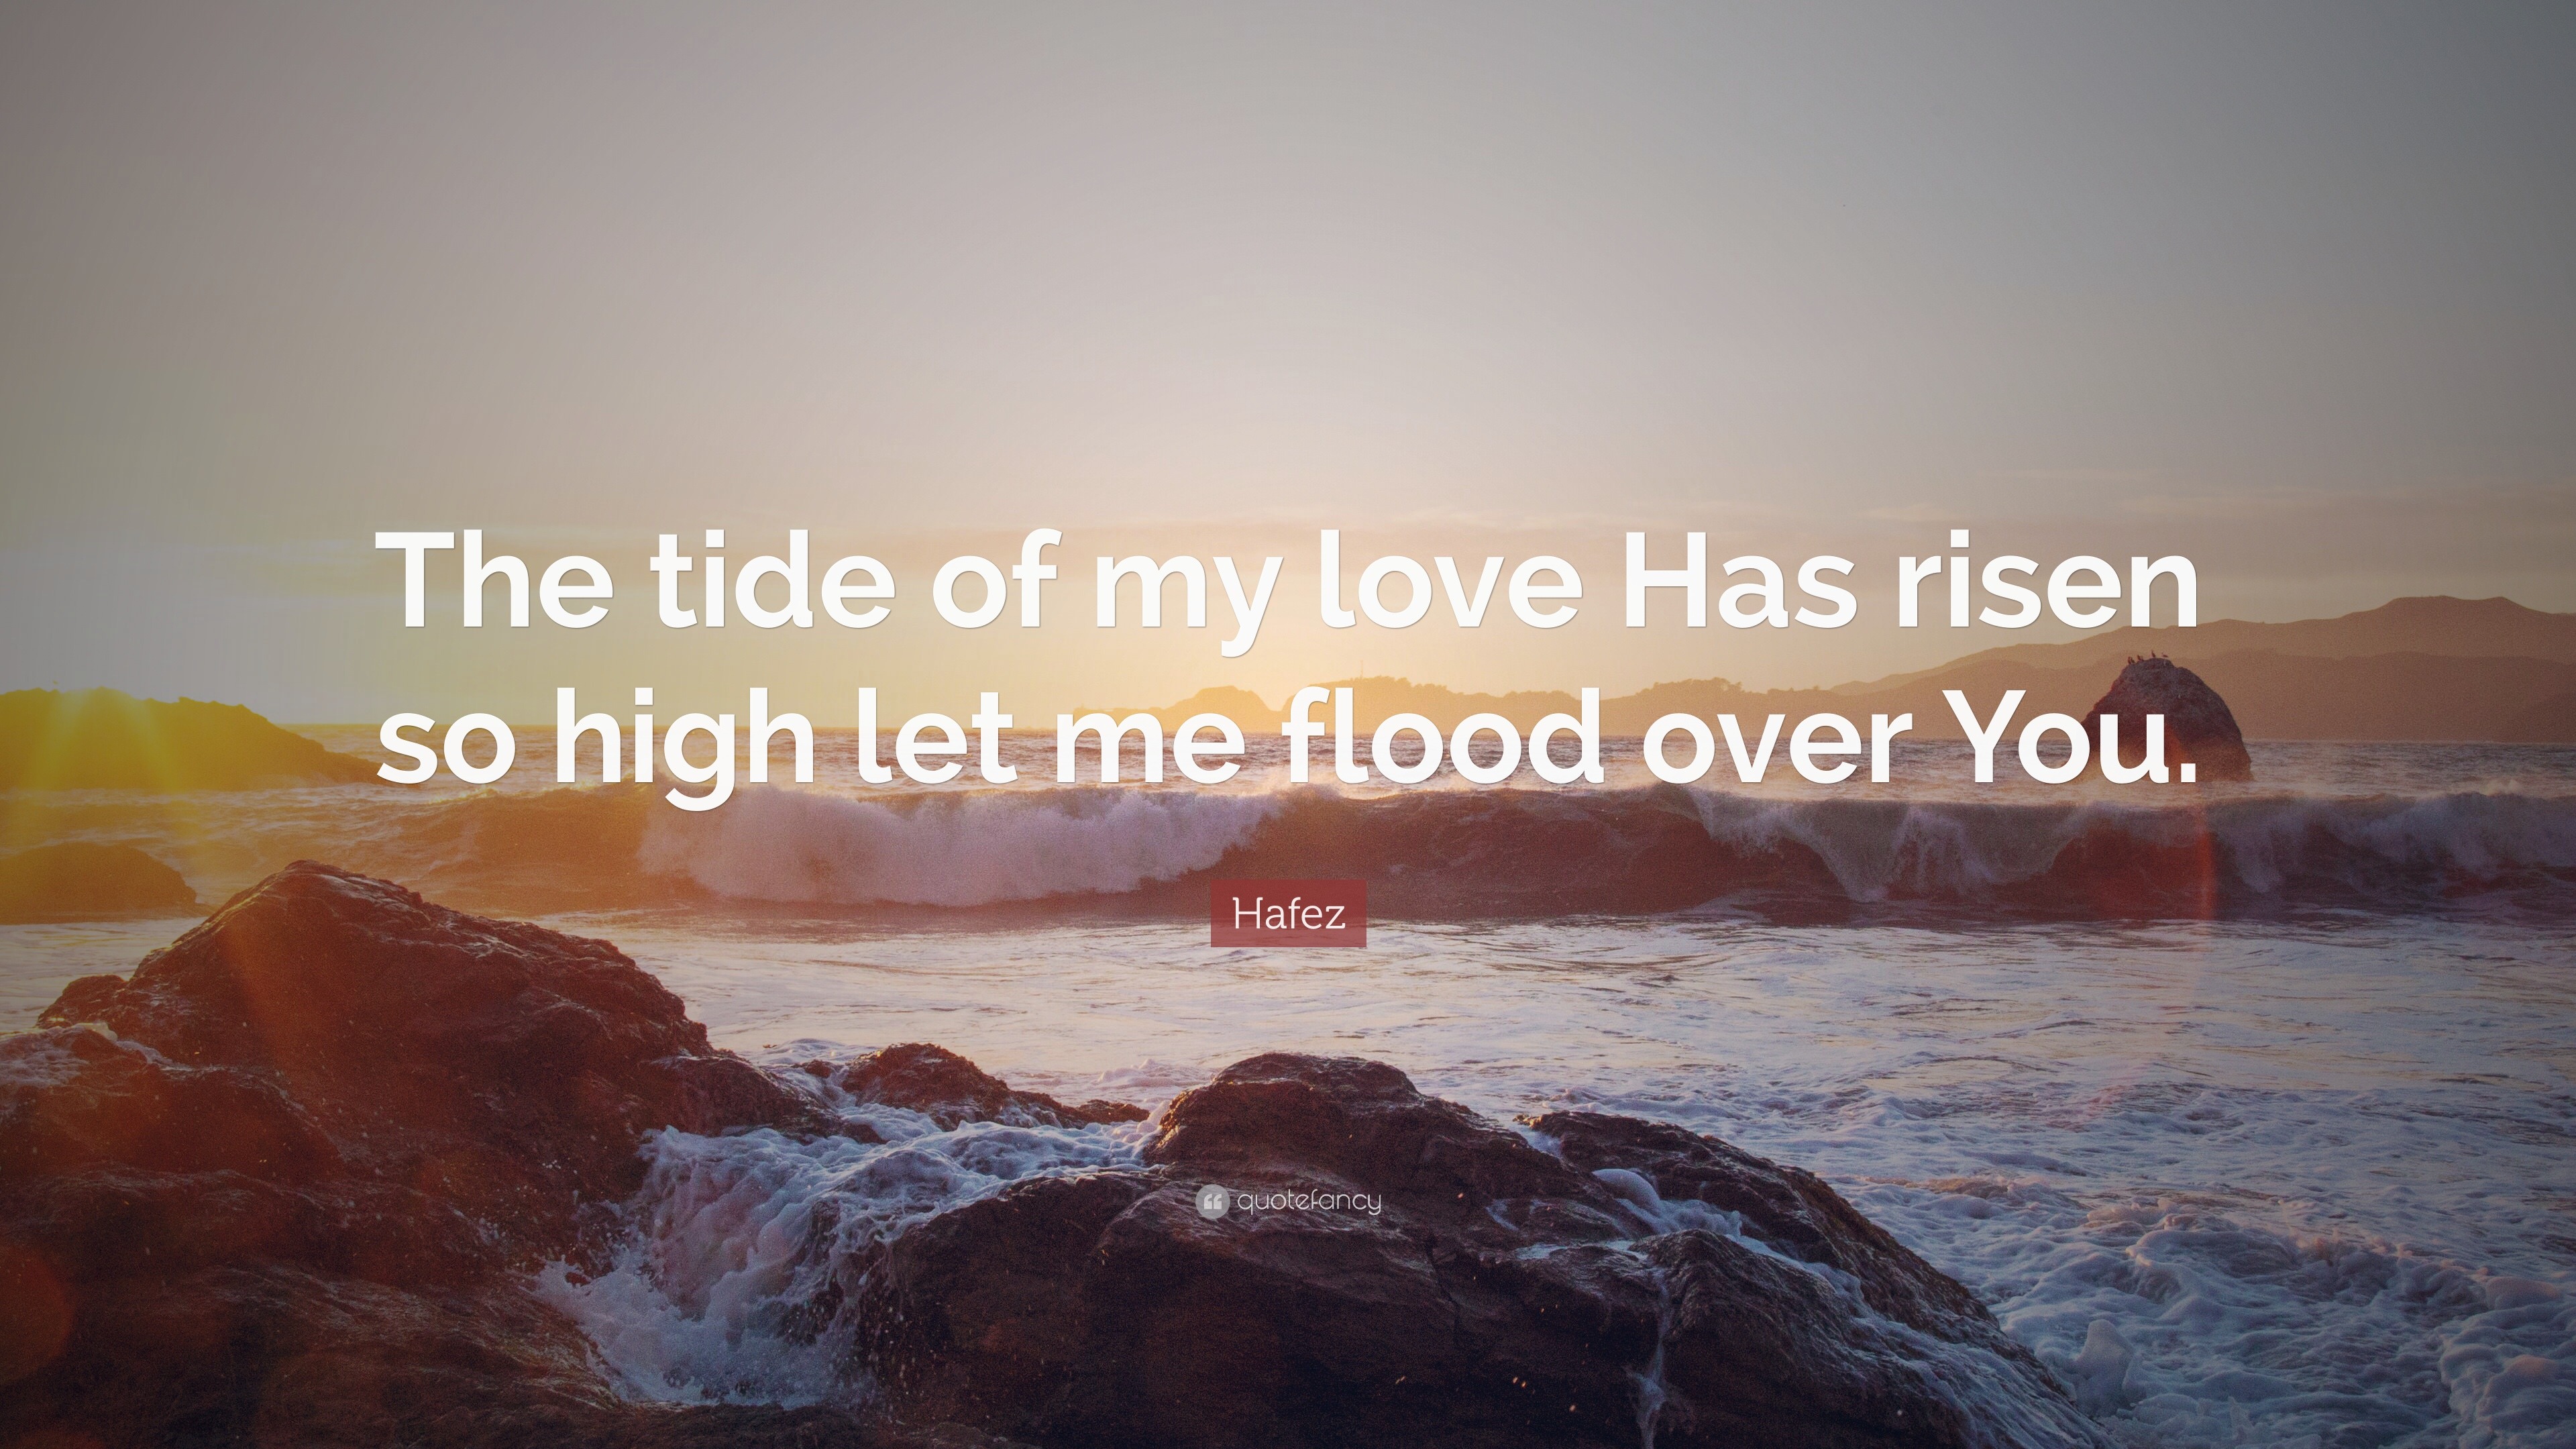 Hafez Quote: “The tide of my love Has risen so high let me flood